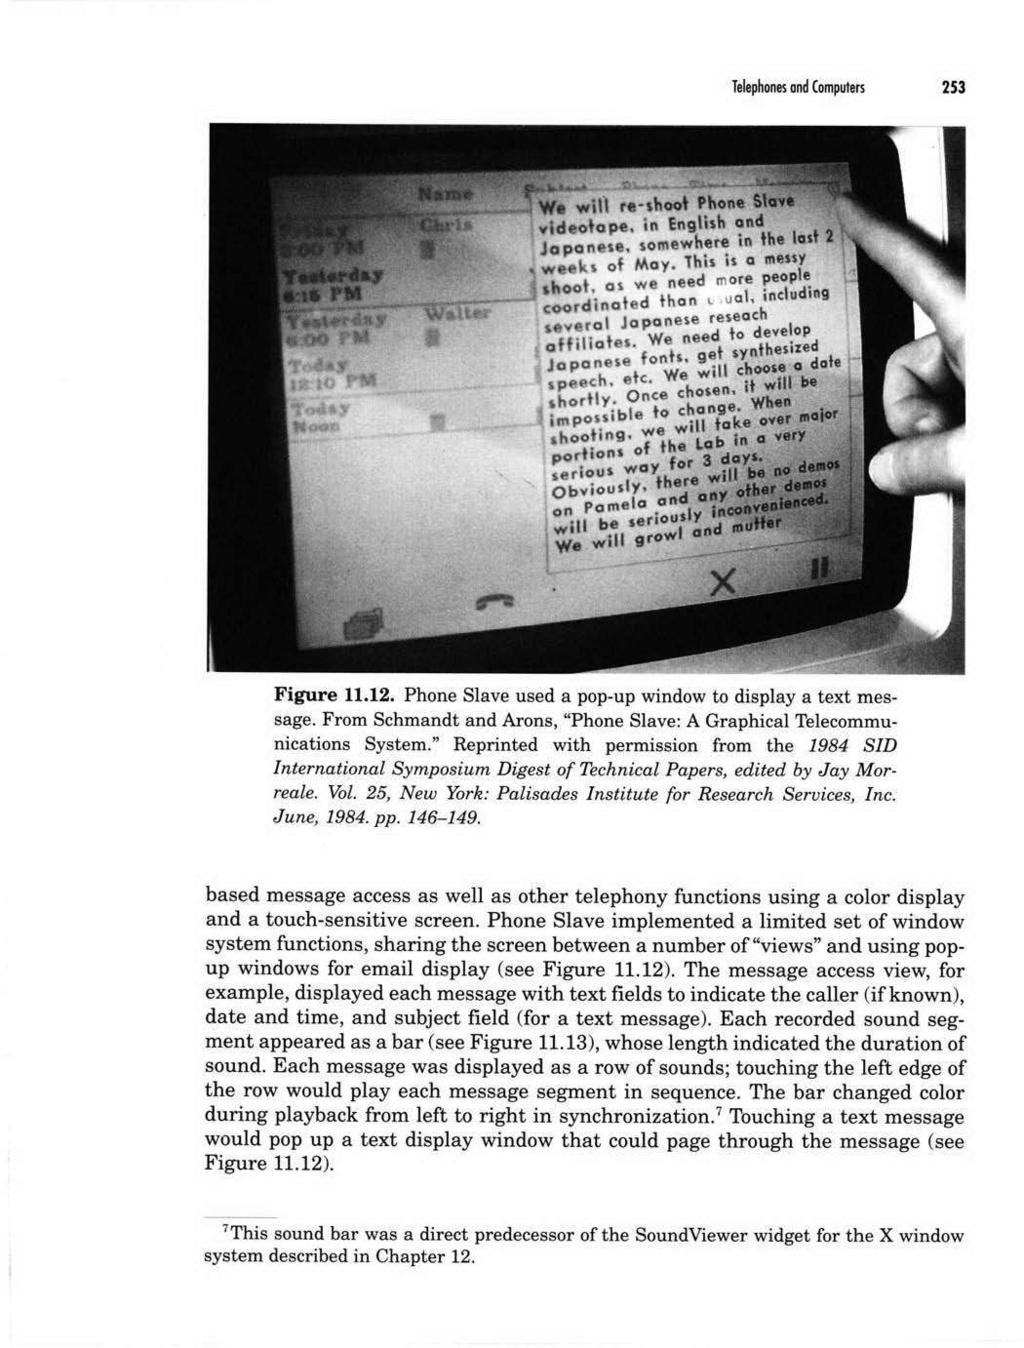 lelephons and Cpute 253 Figure 11.12. Phone Slave used a pop-up window to display a text message. From Schmandt and Axons, "Phone Slave: A Graphical Telecommunications System.